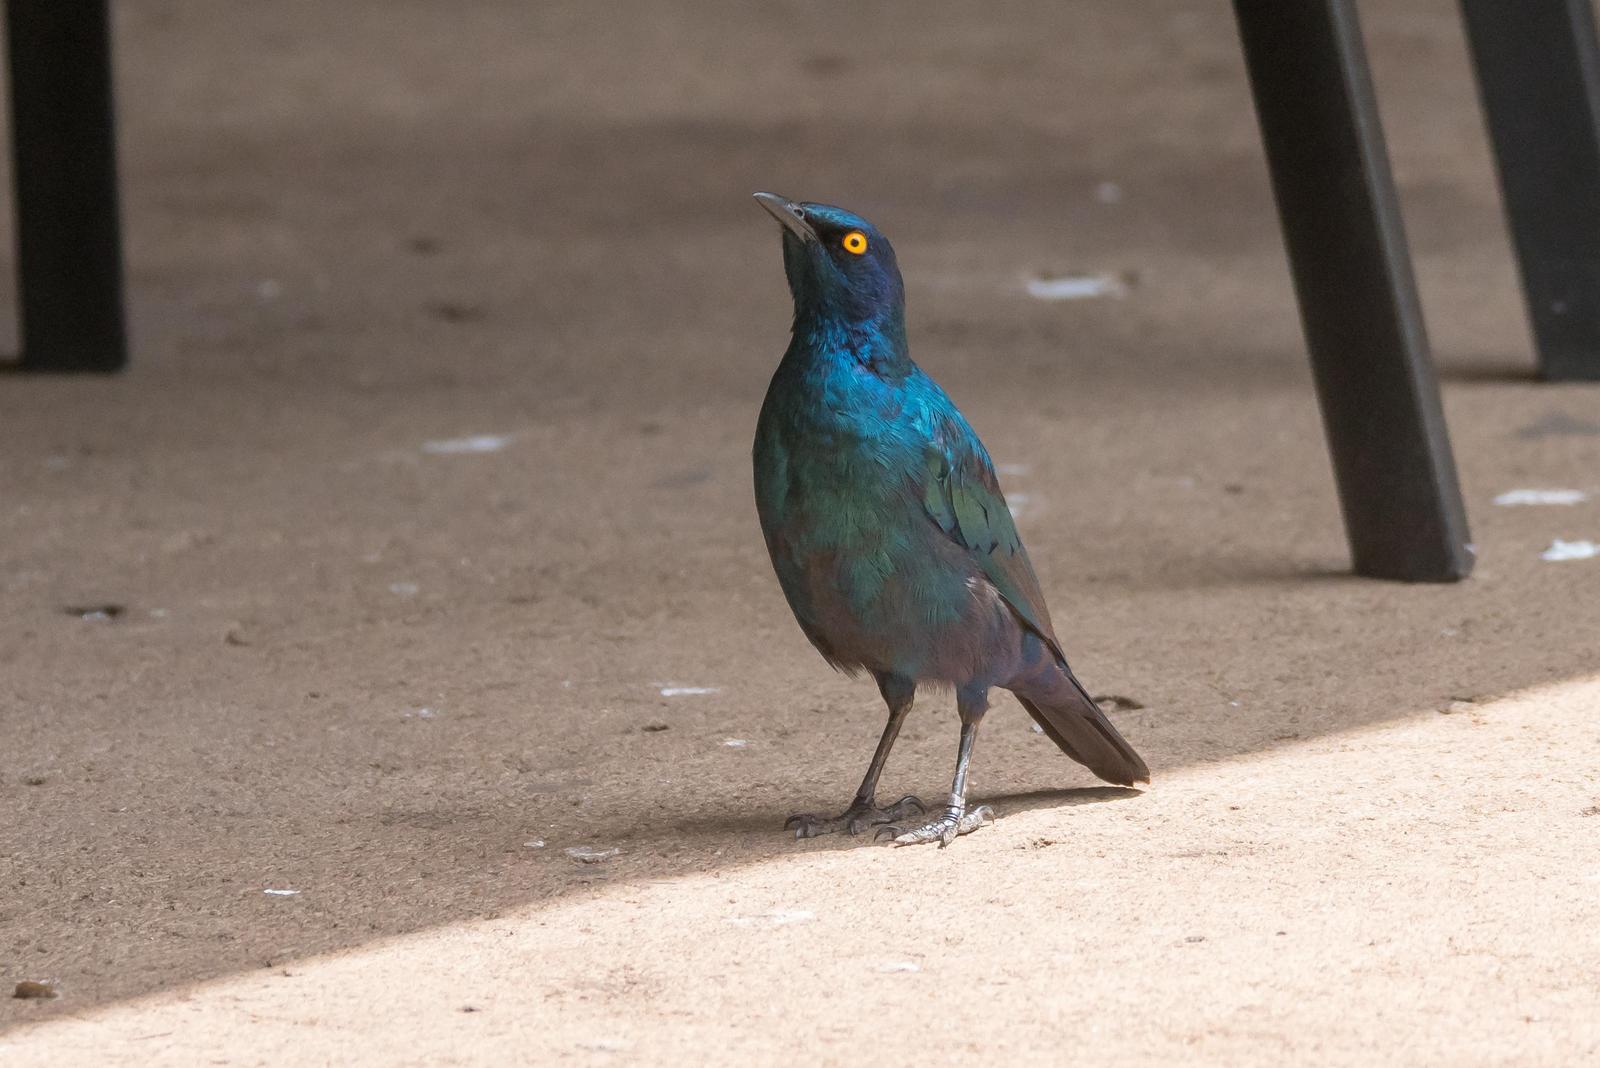 Cape Starling Photo by Gerald Hoekstra